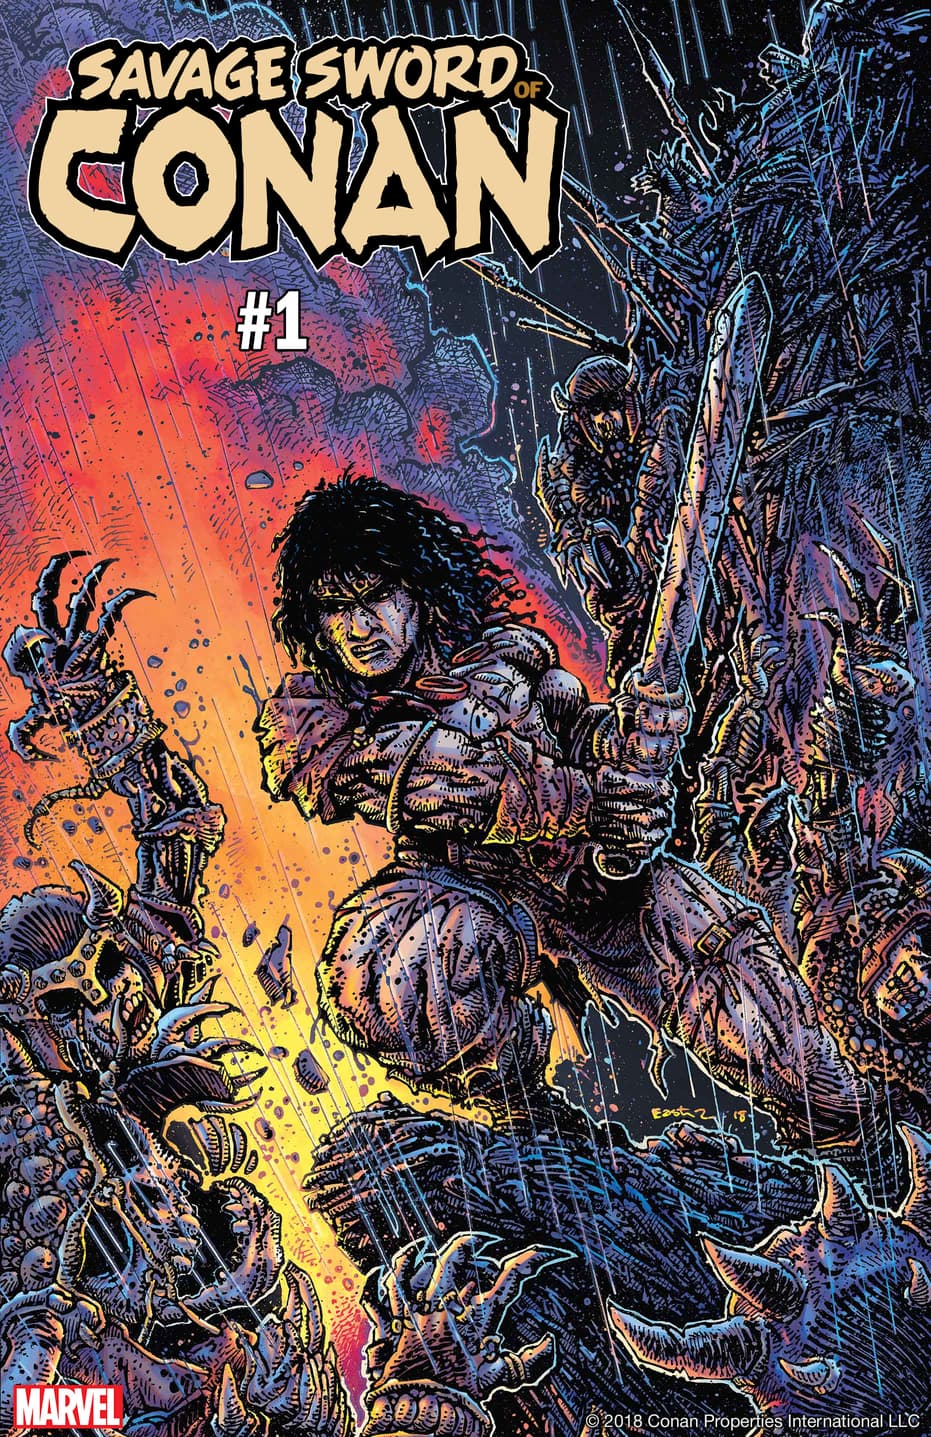 Savage Sword of Conan Cover by Kevin Eastman